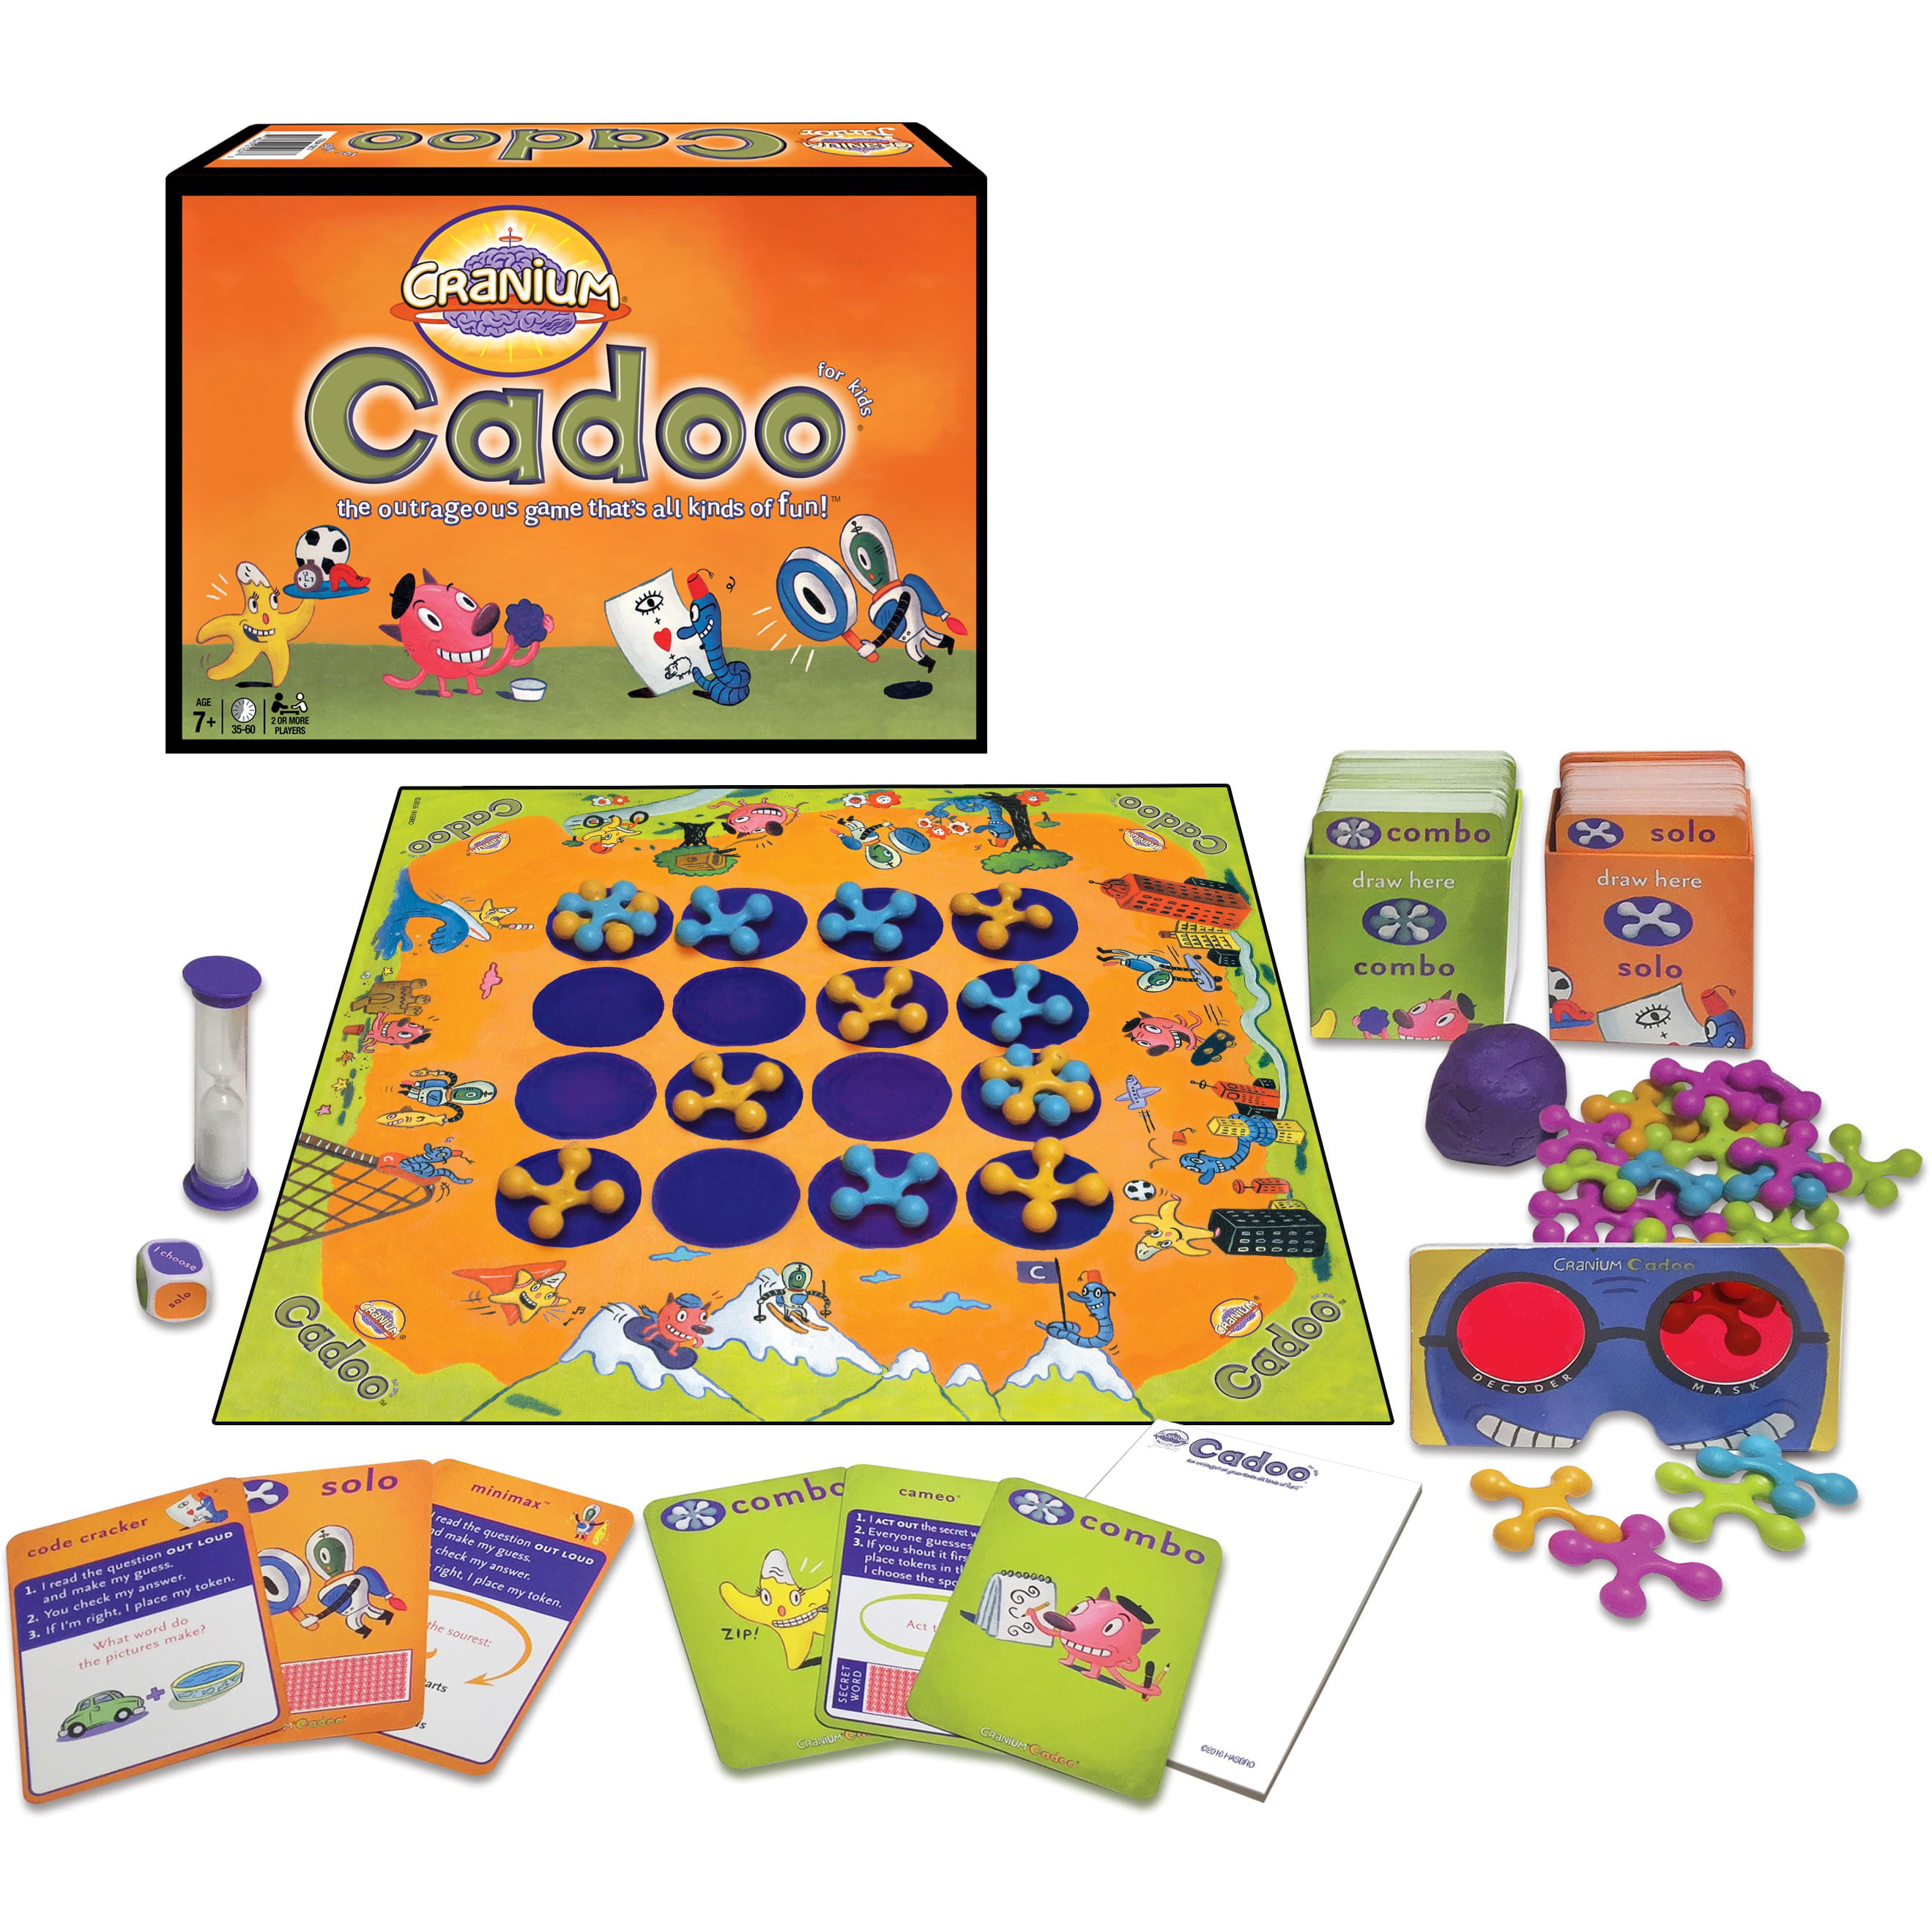 Details about   Cranium Cadoo Game For KIDS All Replacement Spare Parts Save an additional 30% 